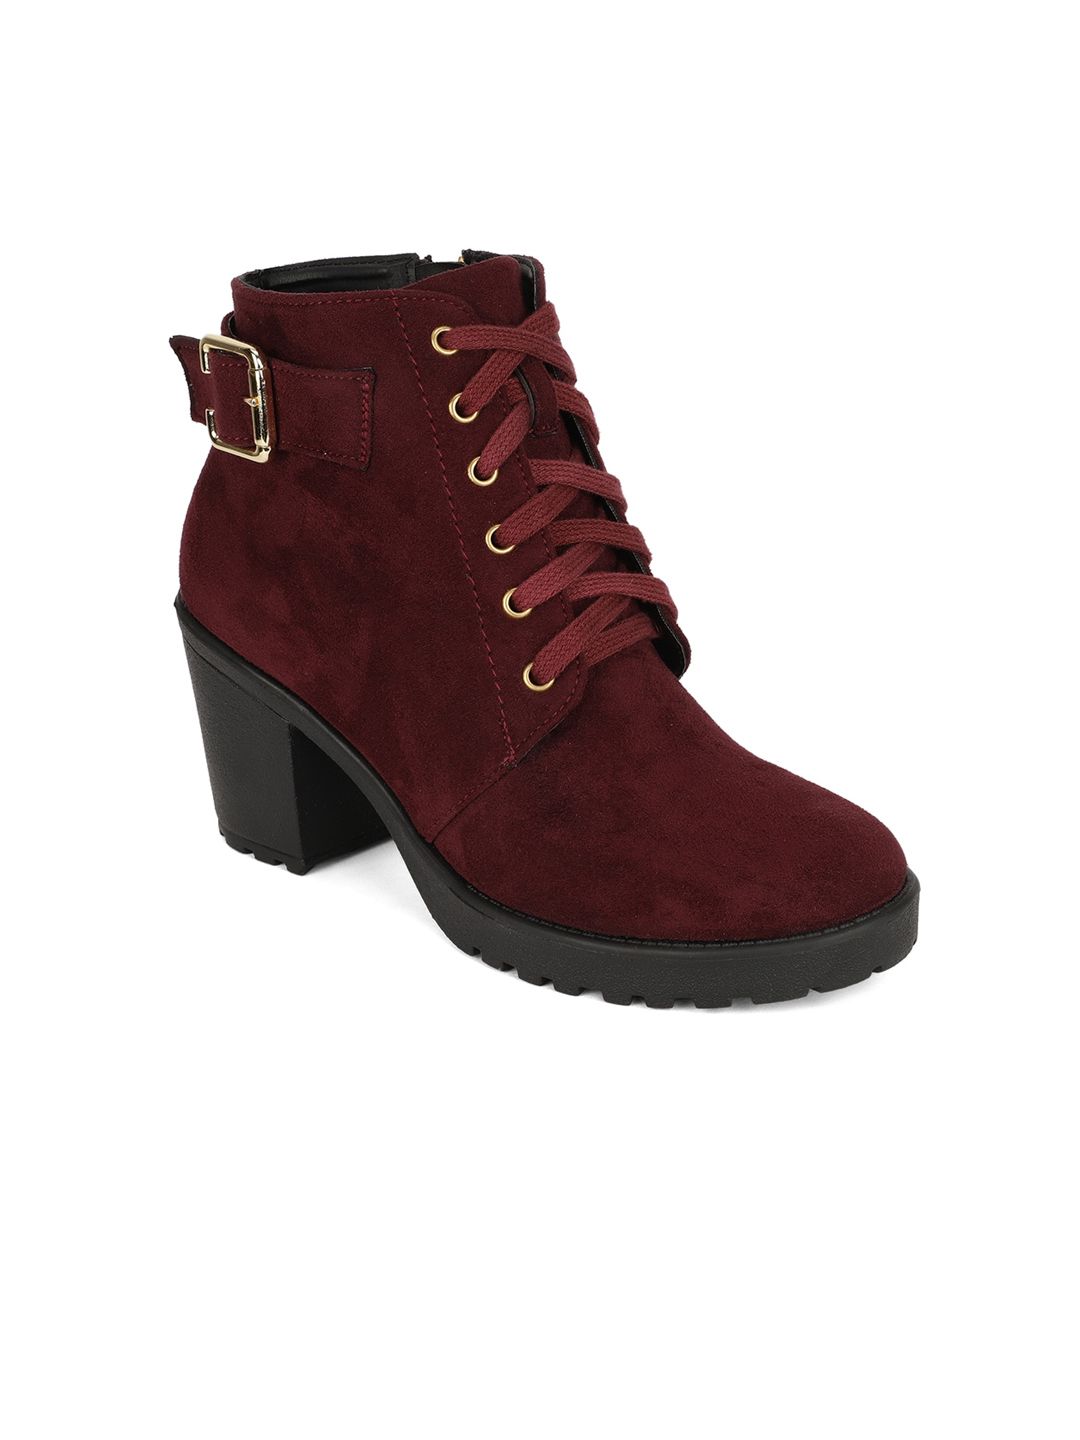 Bruno Manetti Maroon Suede Block Heeled Boots Price in India